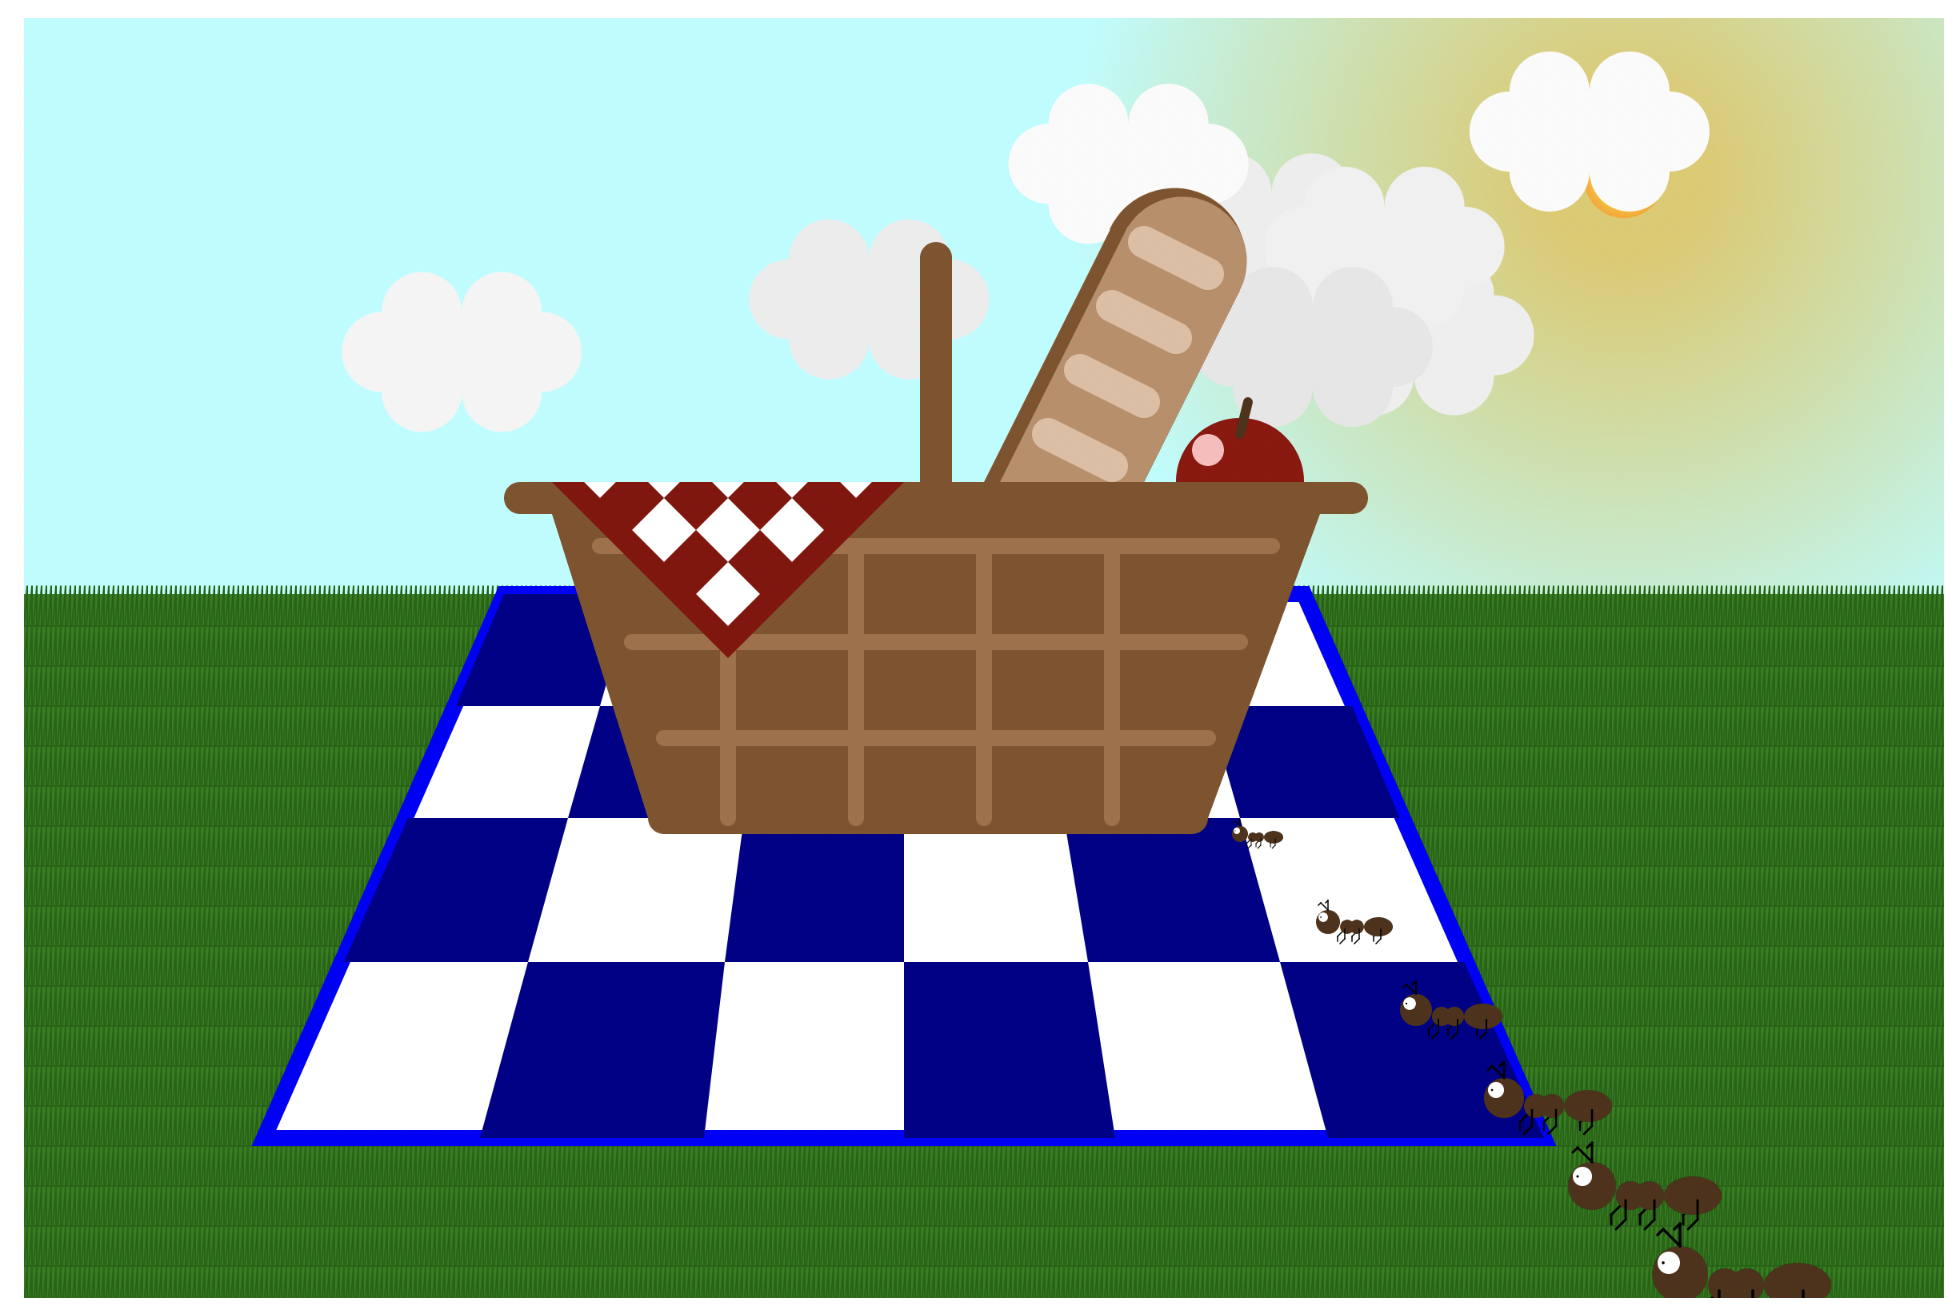 A picnic basket holding bread and apples sits in on a blue-and-white checkered picnic blanket under a cloudy sky. Several ants march towards the basket.